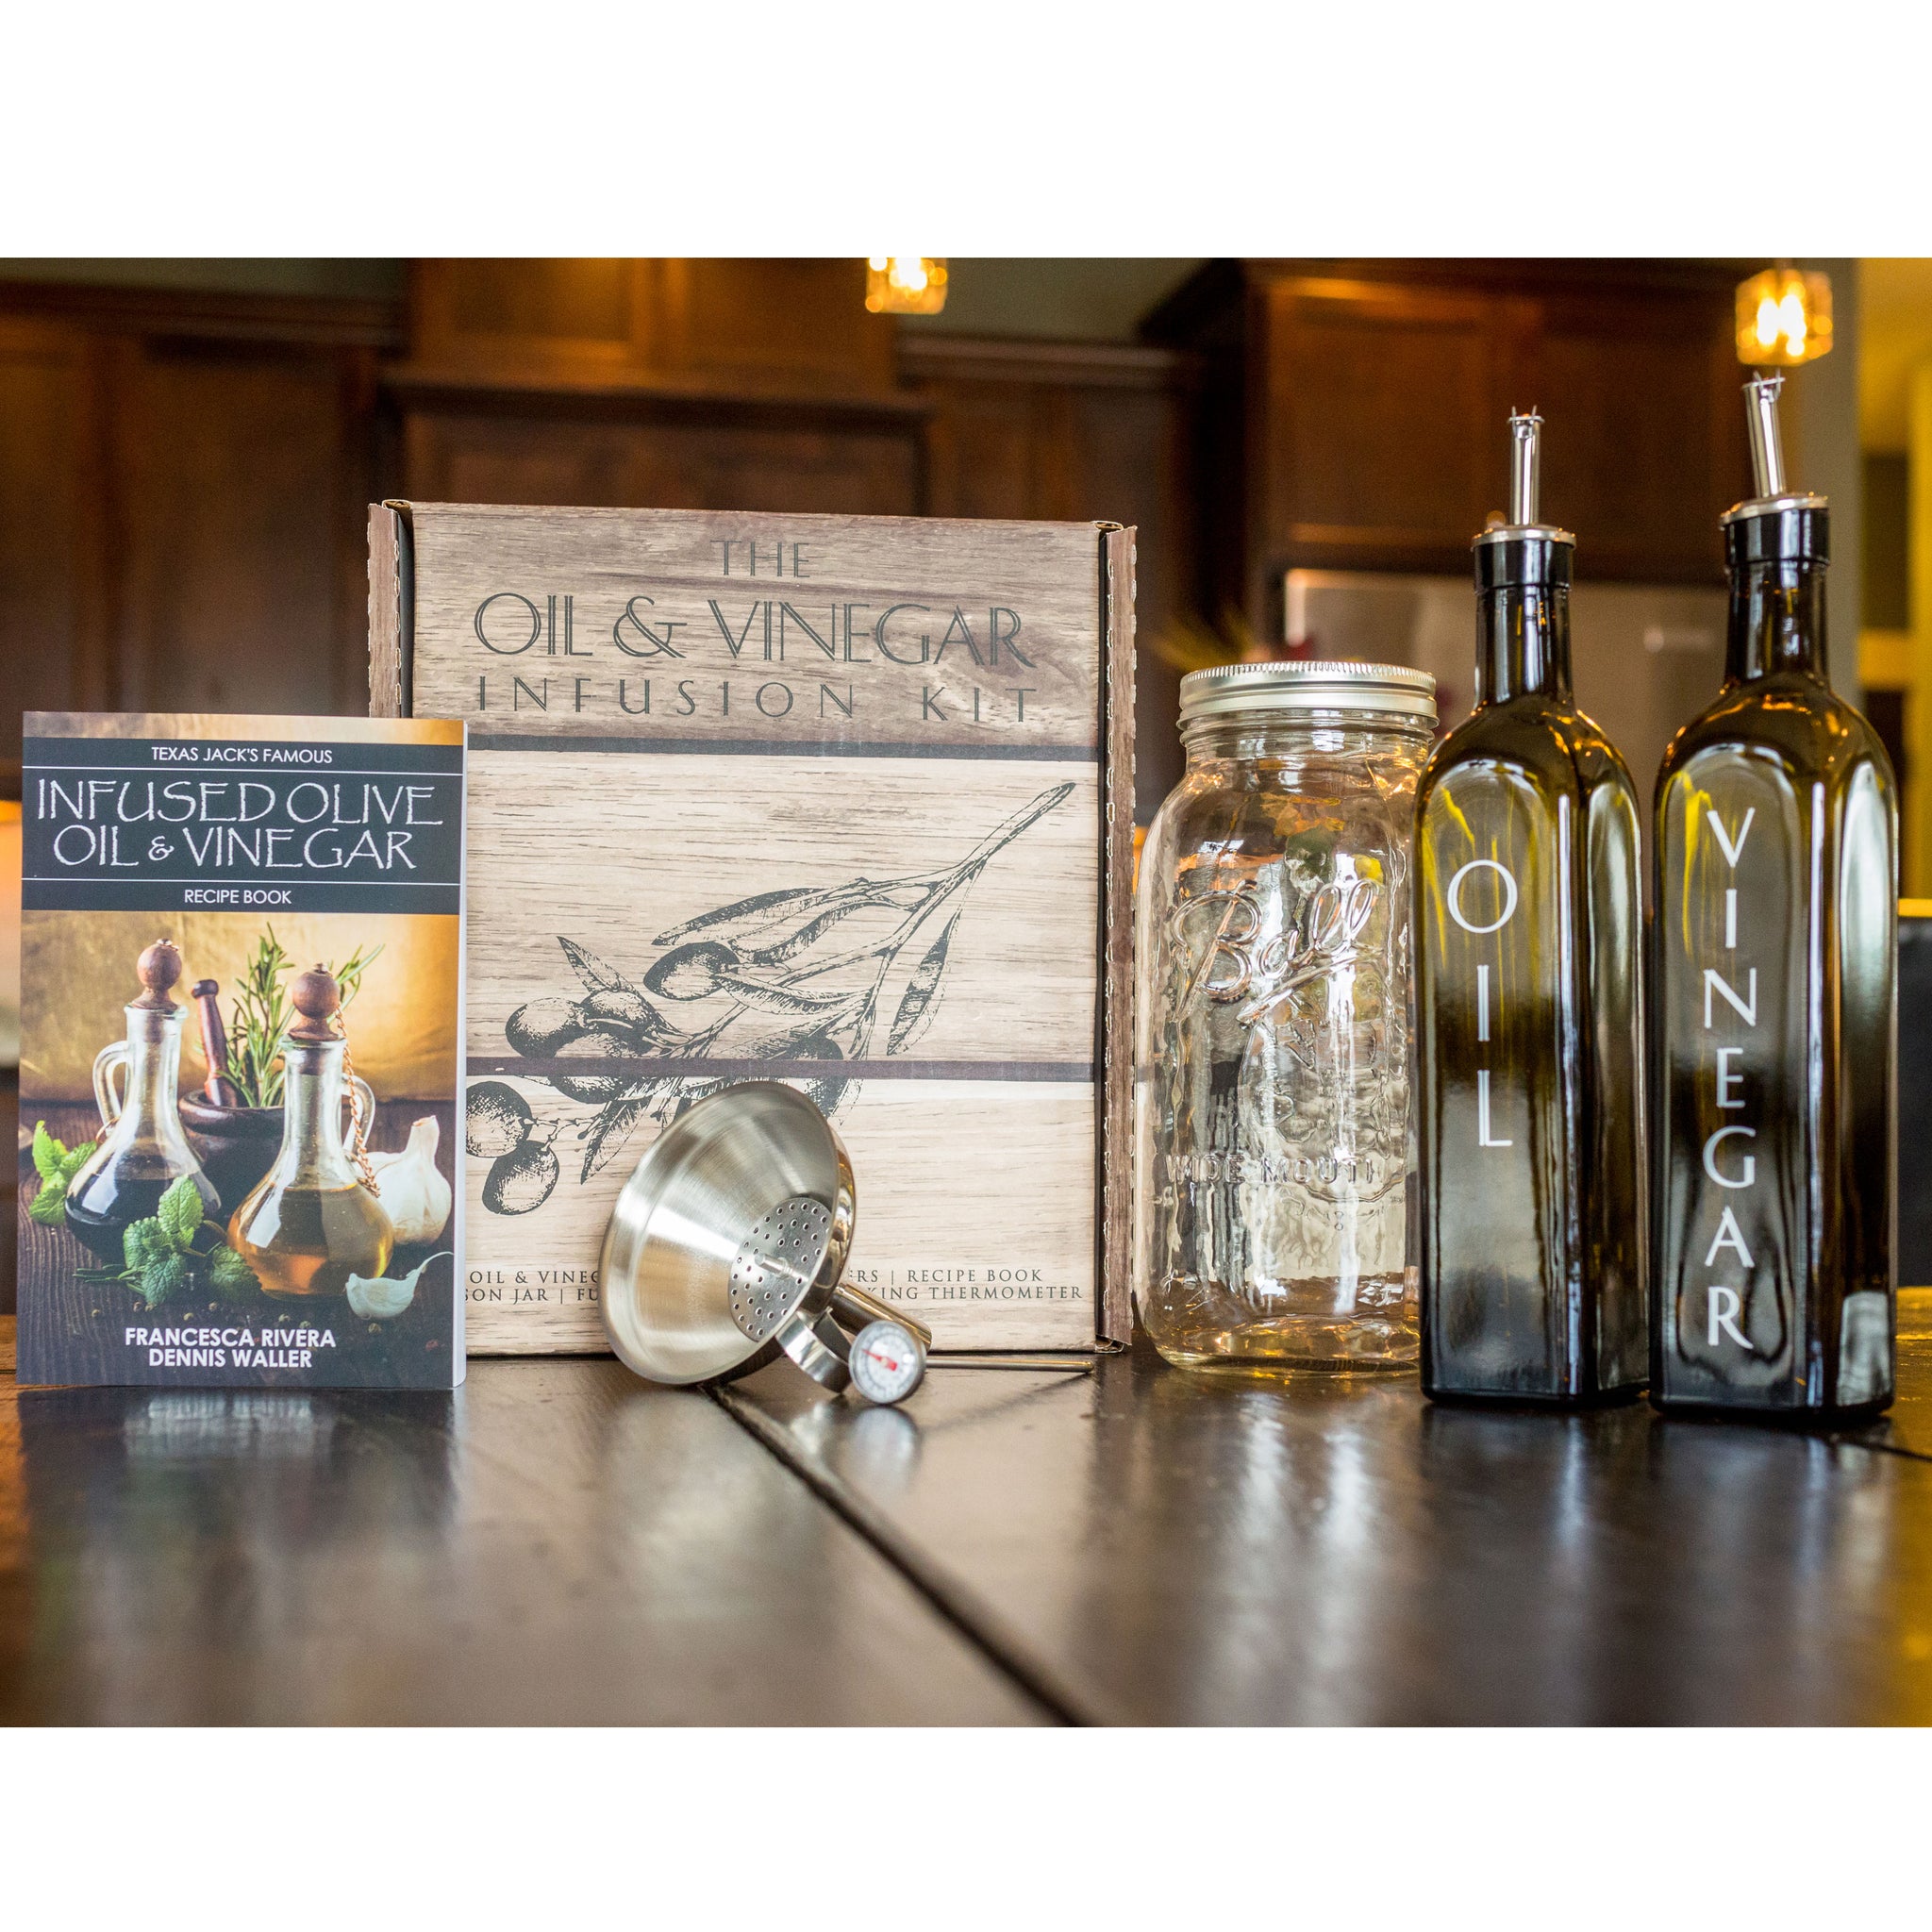 Oil & Vinegar Infusion Kit - Best Recipes! – Craft Connections Co